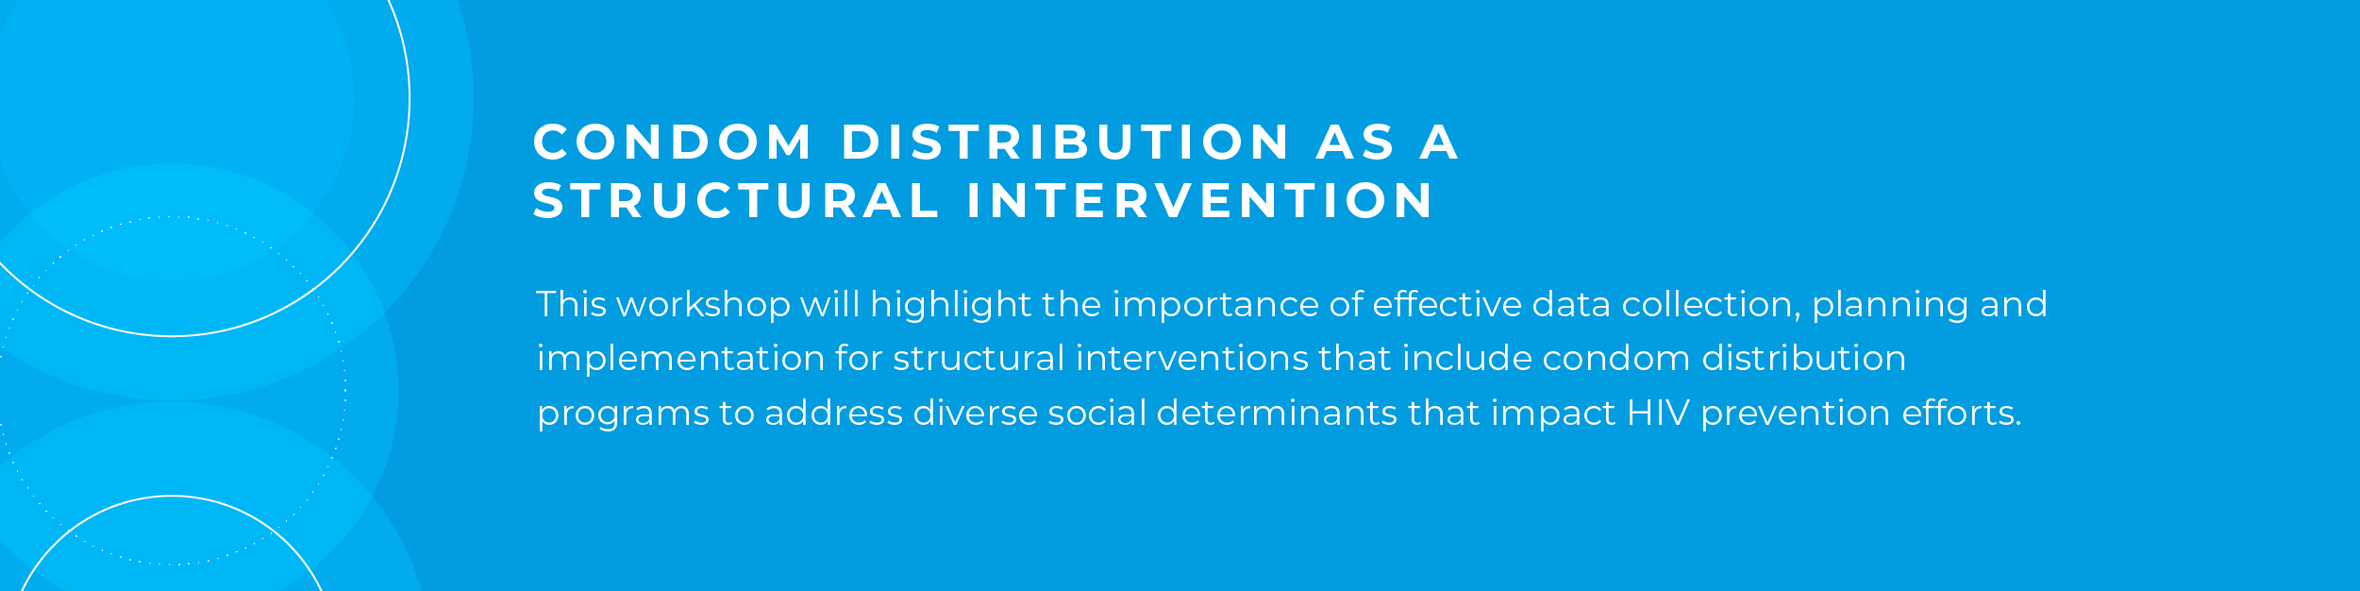 Condom Distribution as a structural intervention